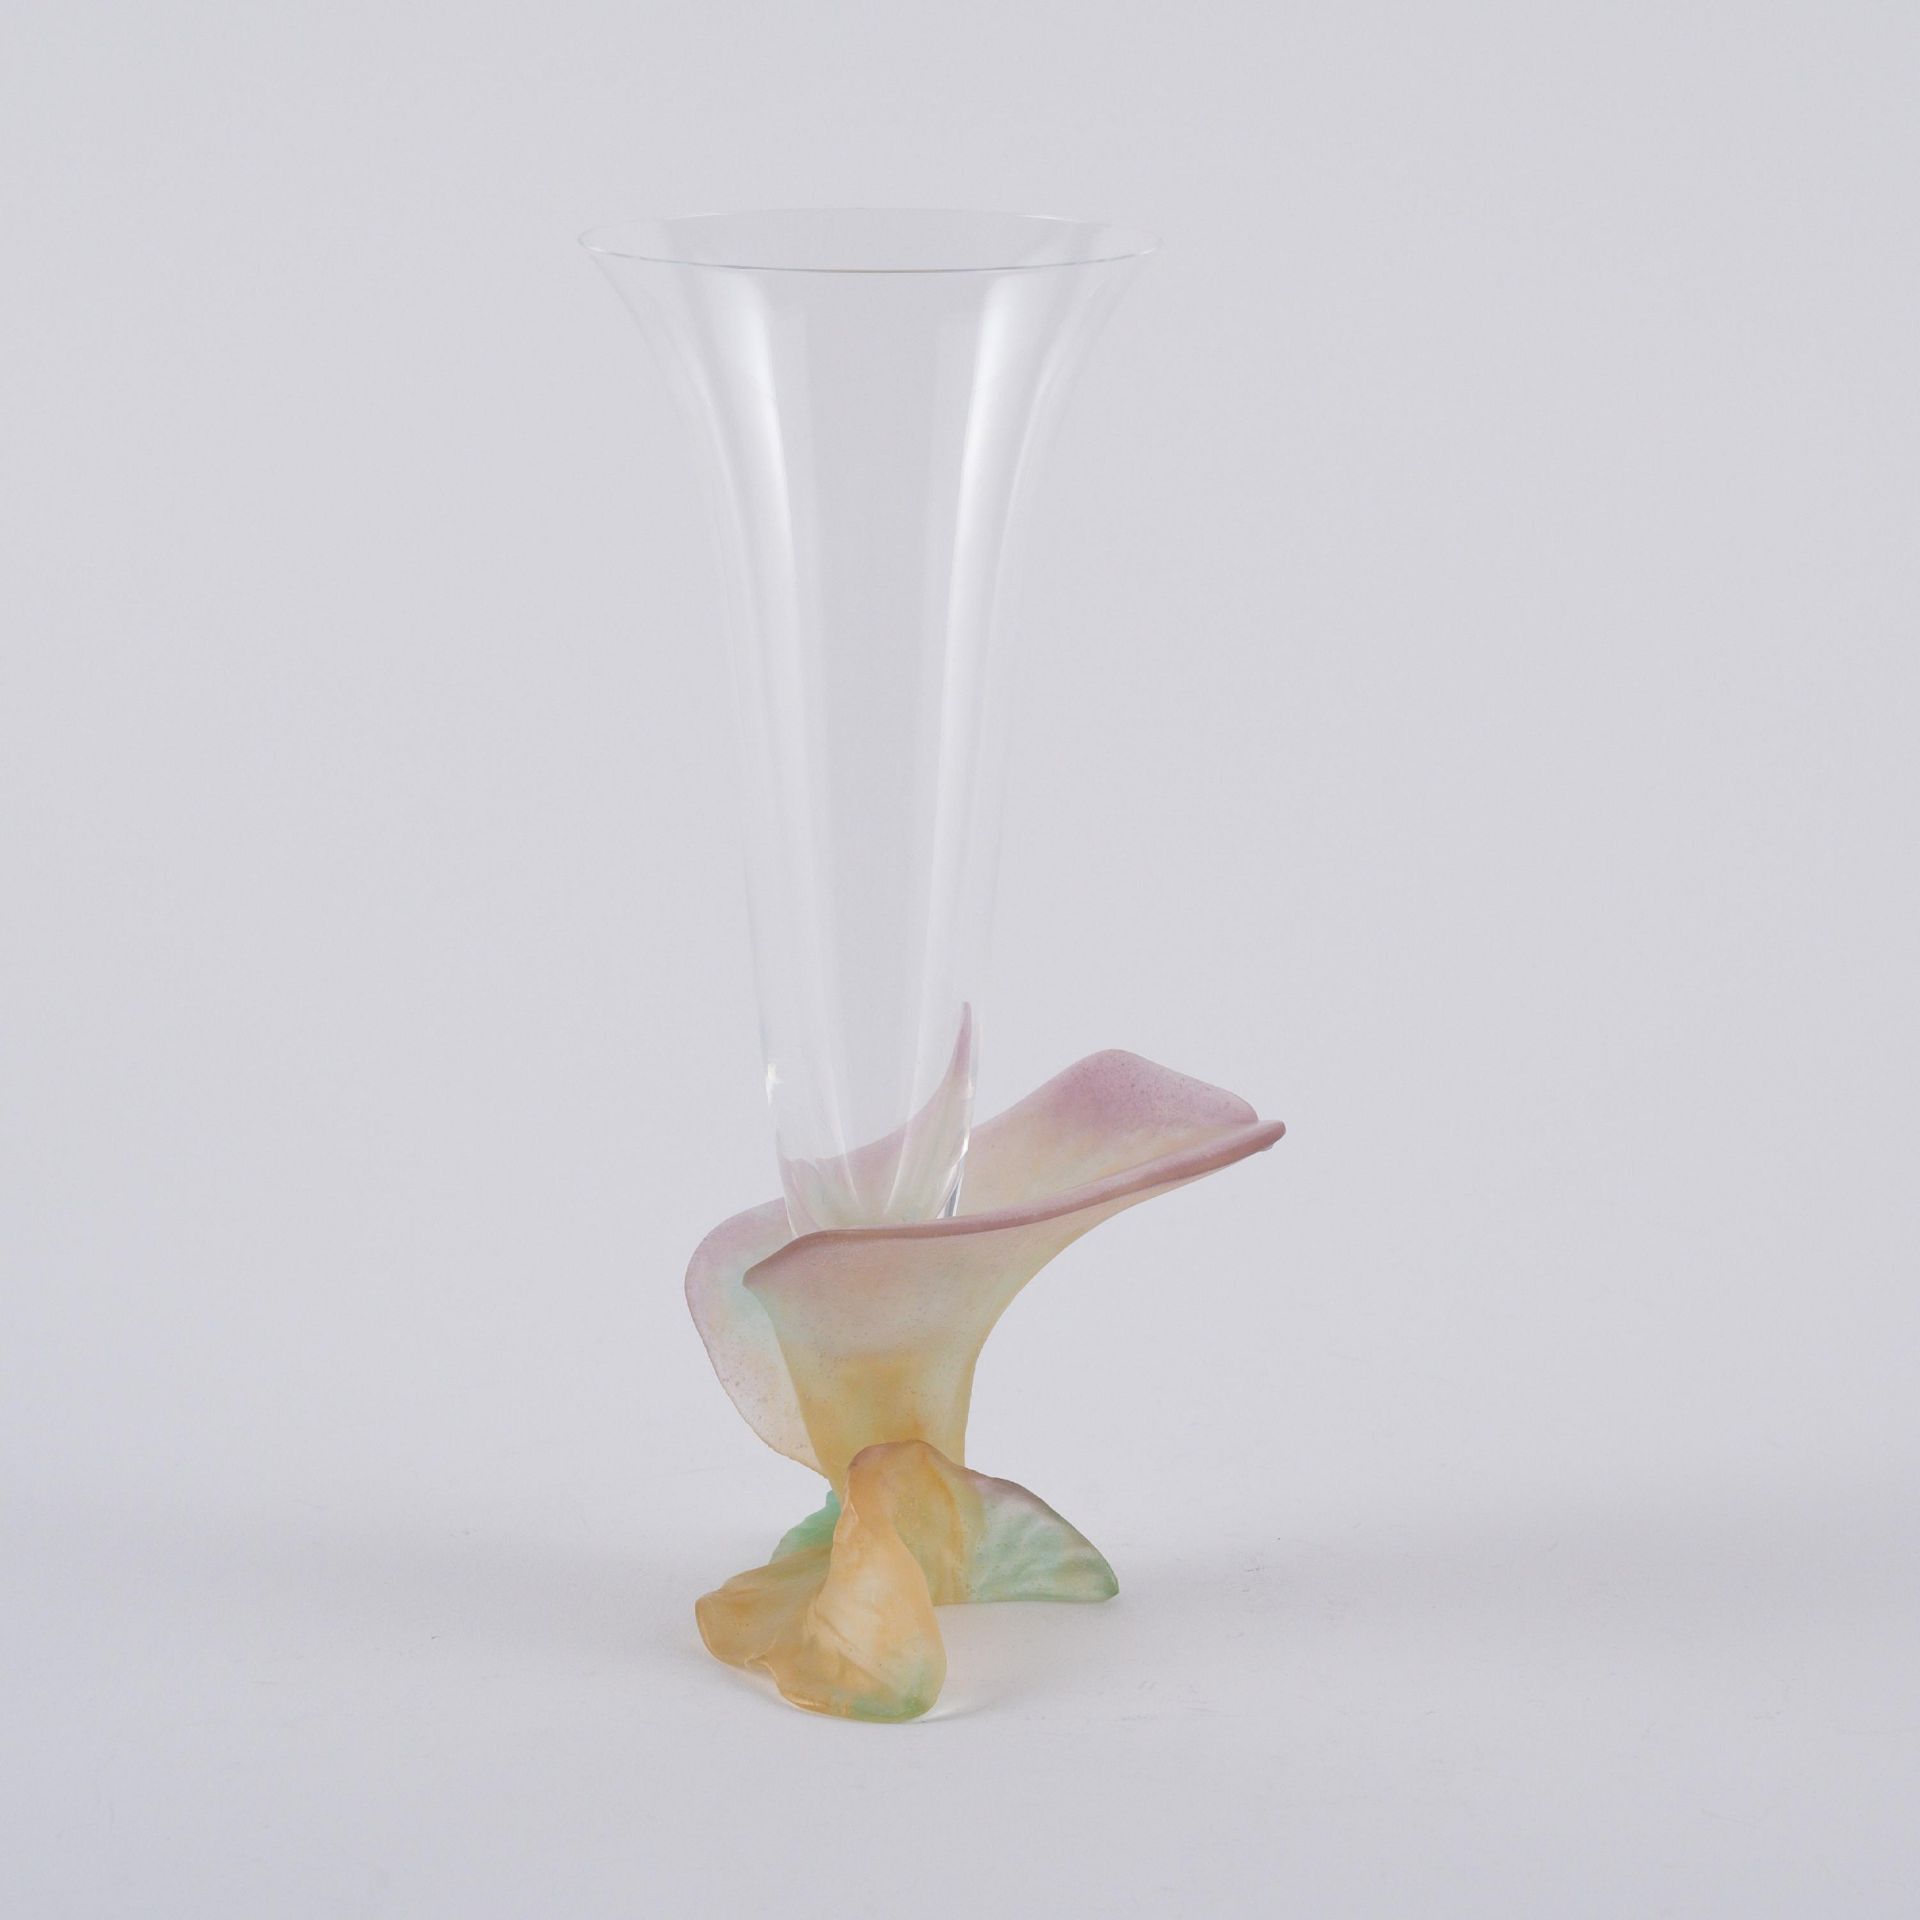 GLASS GOBLET WITH FLOWER BASE - Image 3 of 6